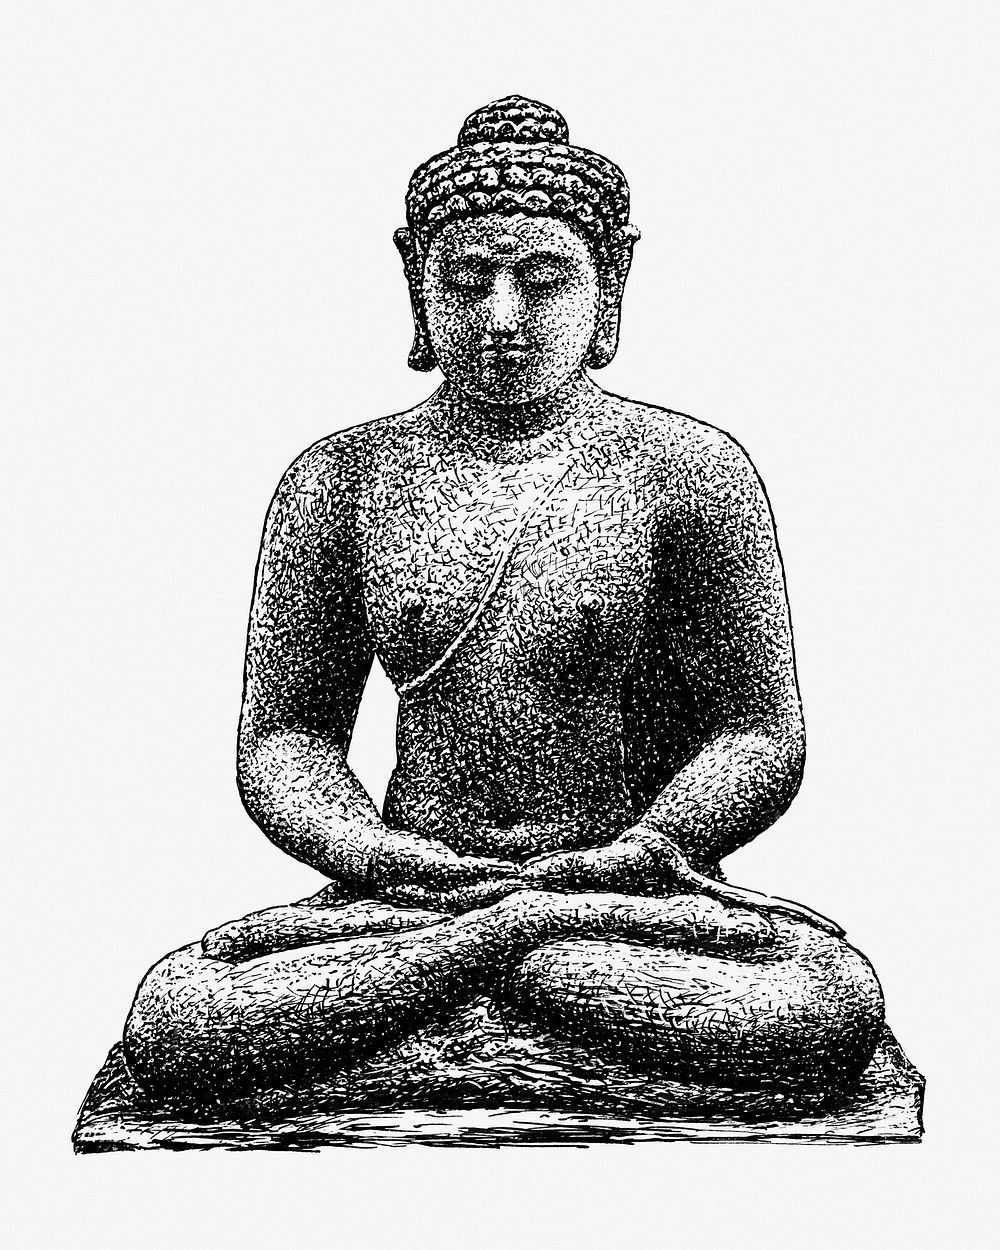 Buddha statue psd vintage illustration, remixed from artworks from Leo Gestel